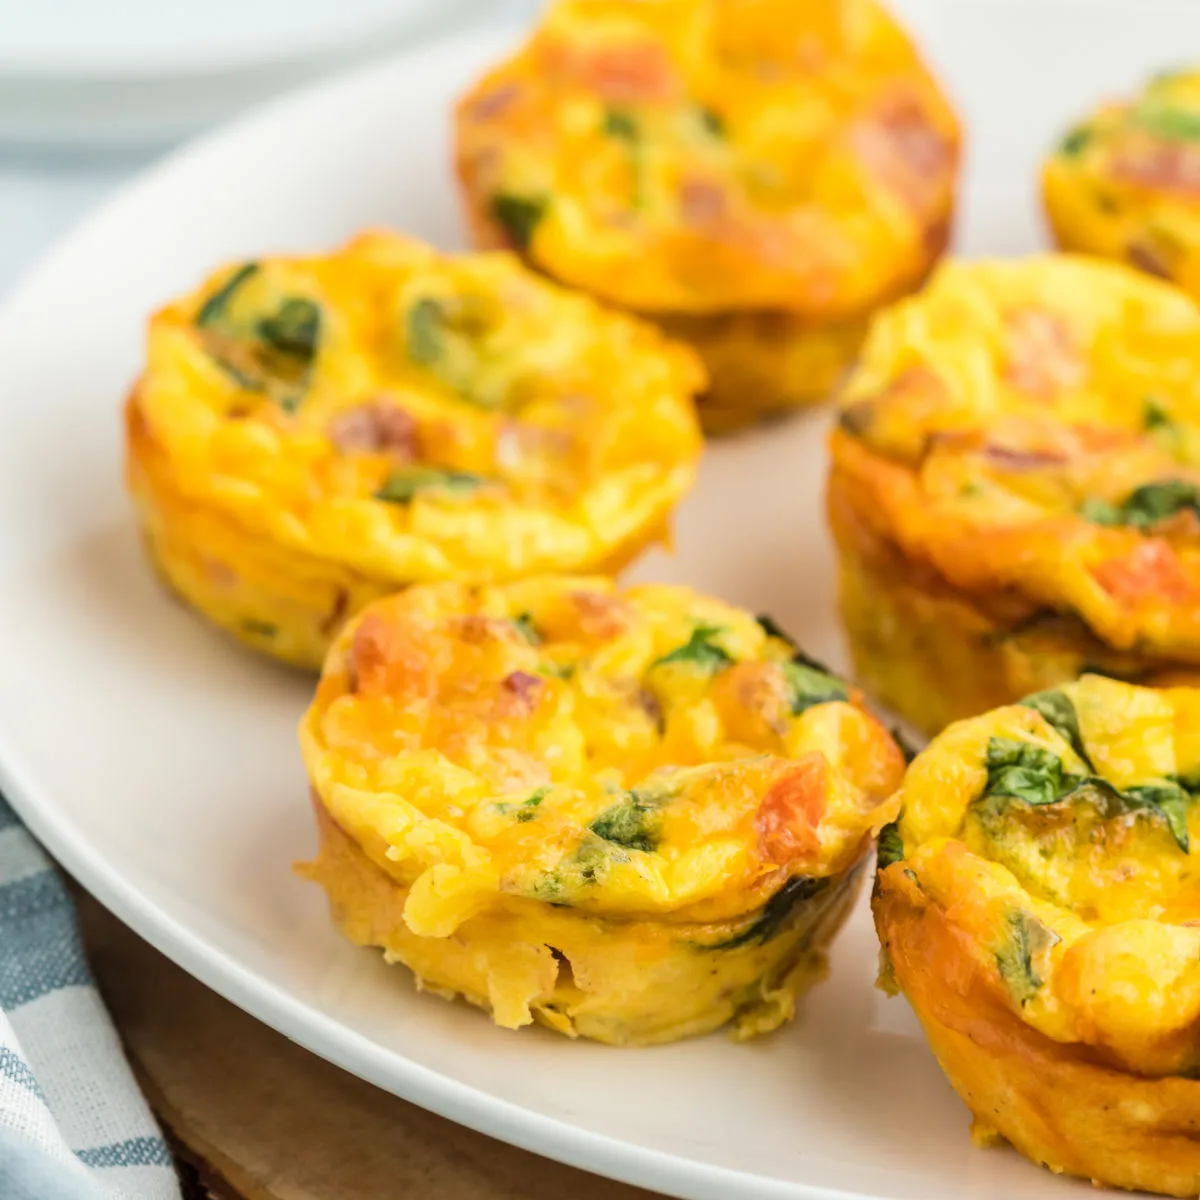 These easy Egg Bites taste like mini frittatas! Made in a muffin tin, they're filled with crispy bacon, fresh spinach and juicy tomatoes for a healthy breakfast or anytime snack.